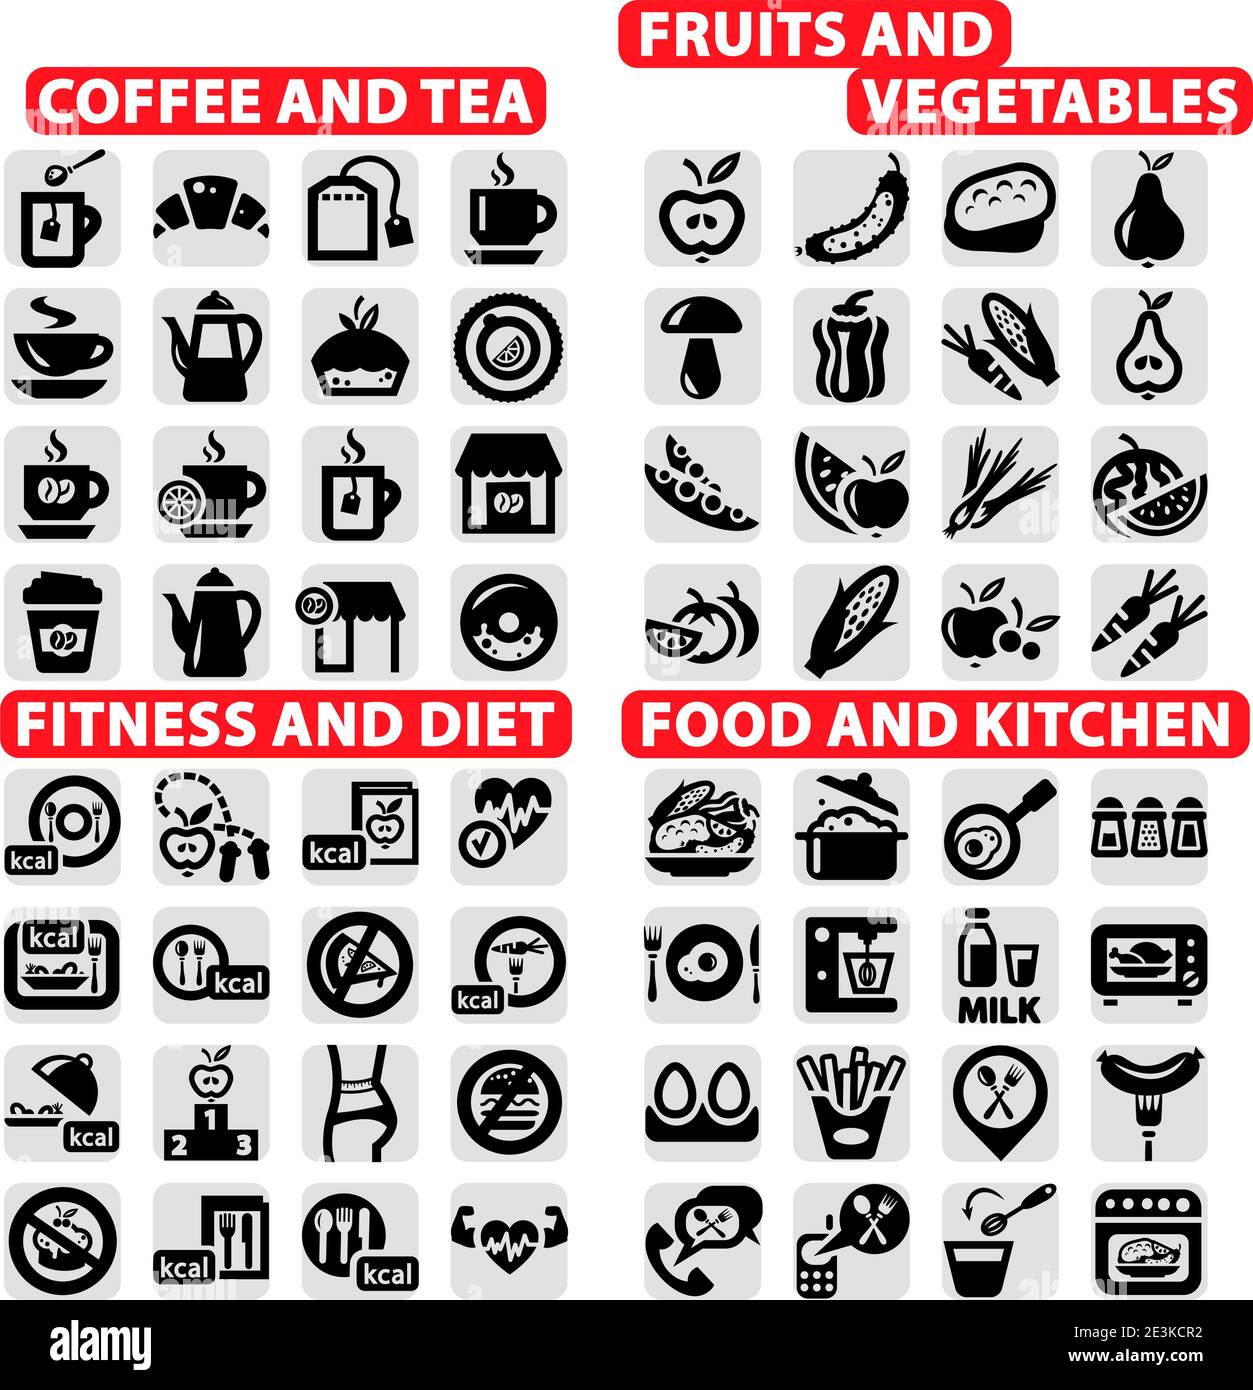 Elegant Vector Coffee and Tea, food, Fruits and Vegetables, Fitness and Siet Icons Set. Stock Vector